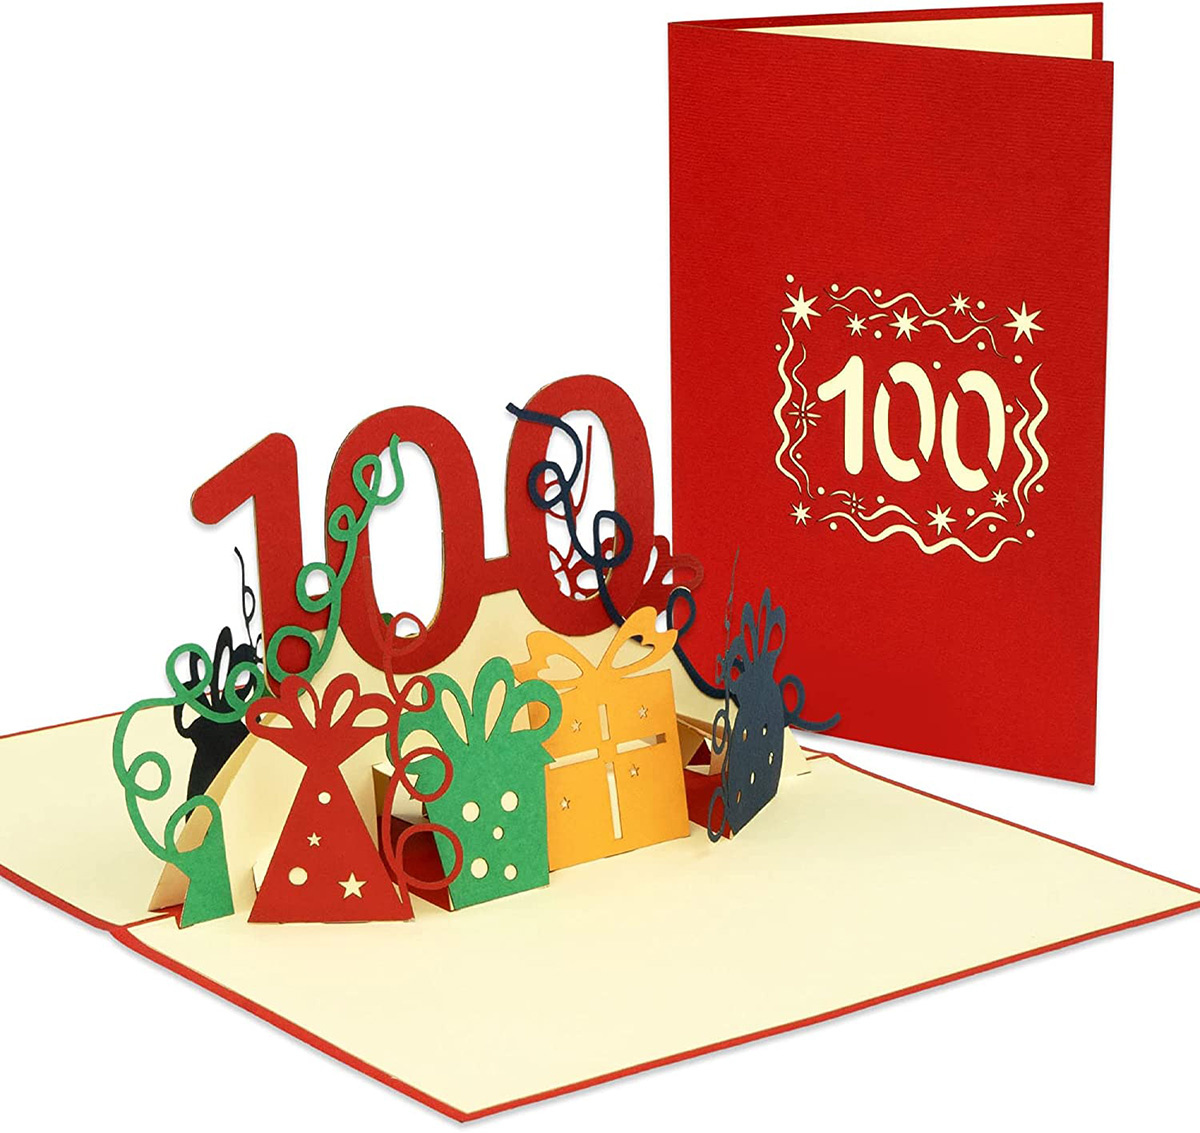 LINPOPUP 3D Pop Up Greeting Card, Birthday Card, Anniversary, 100th Birthday, anniversary number100, LIN17598, LINPopUp®, N352